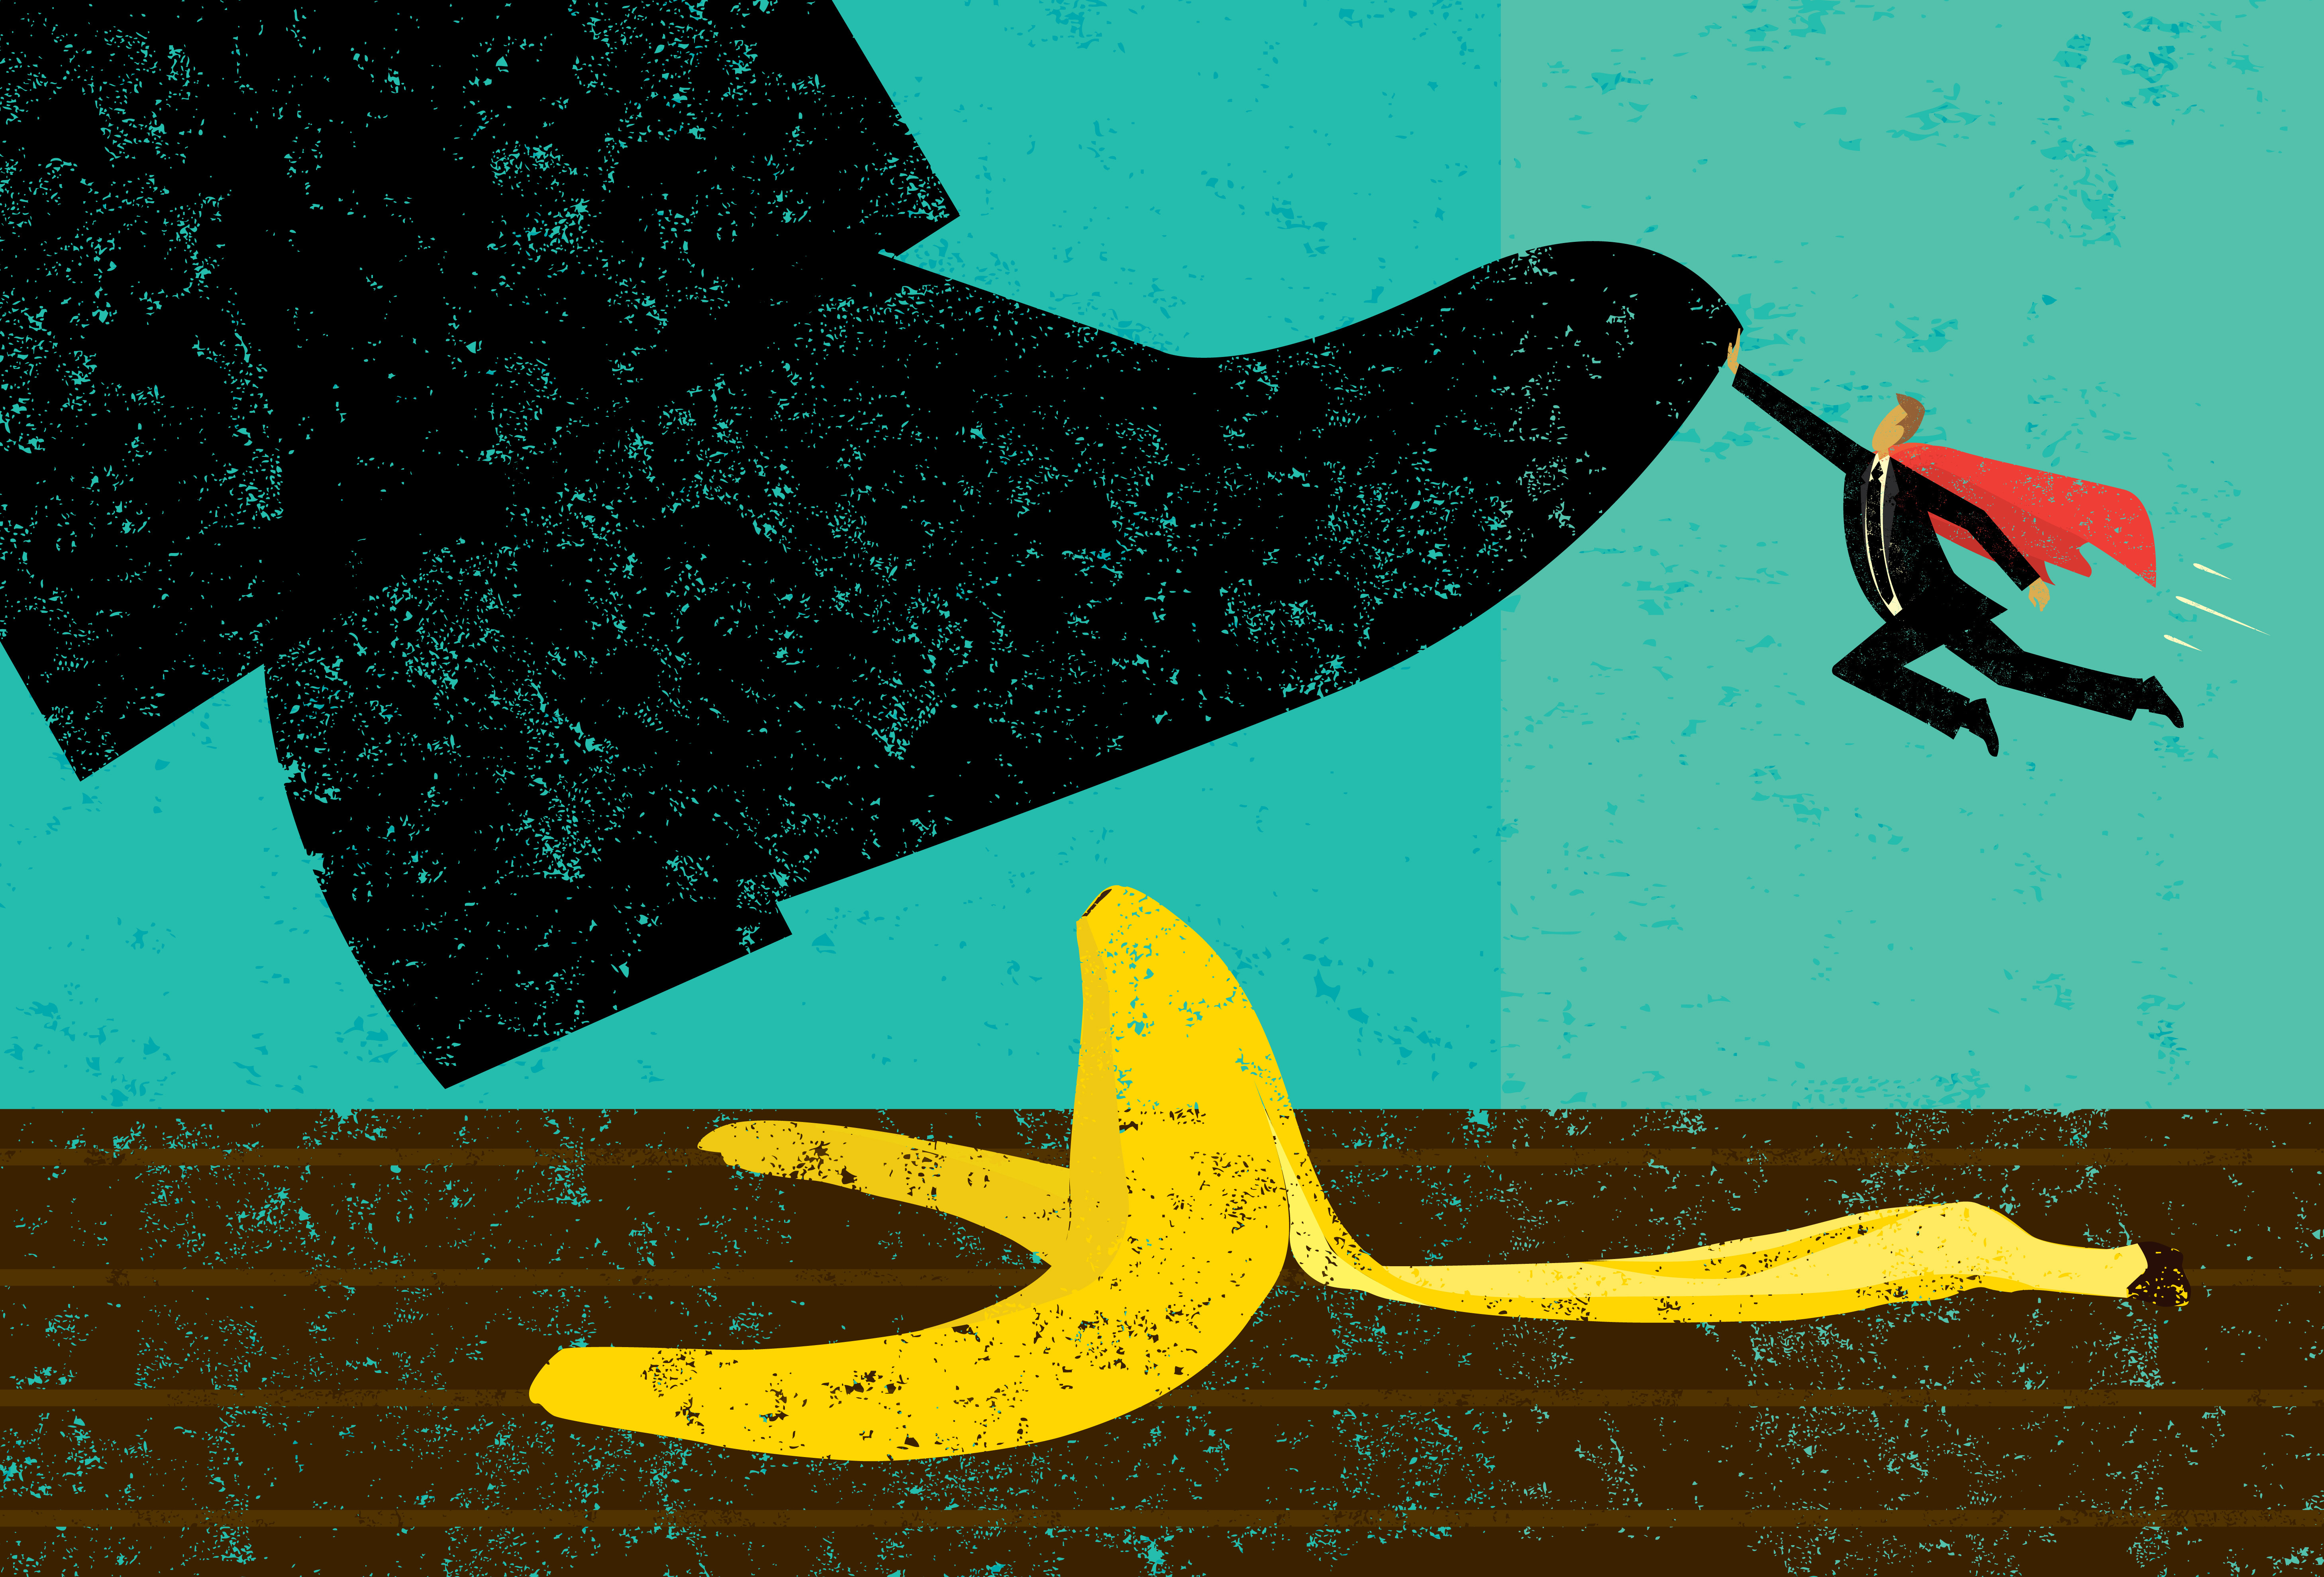 Illustration of giant shoe about to step on a banana peel as a tiny superhero tries to save the day.